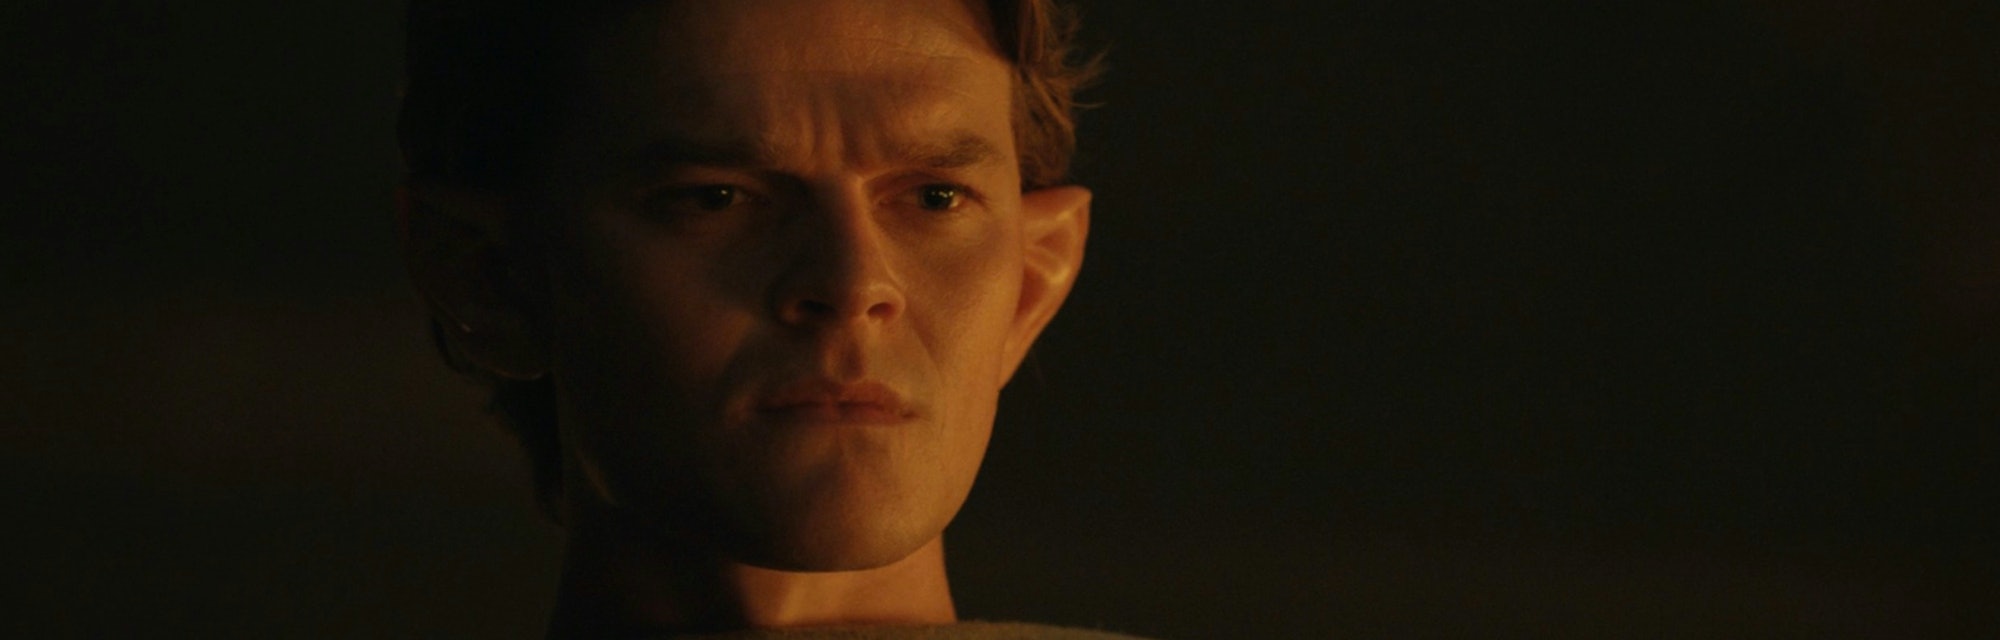 Elrond (Robert Aramayo) looks down in confusion in The Lord of the Rings: The Rings of Power Episode...